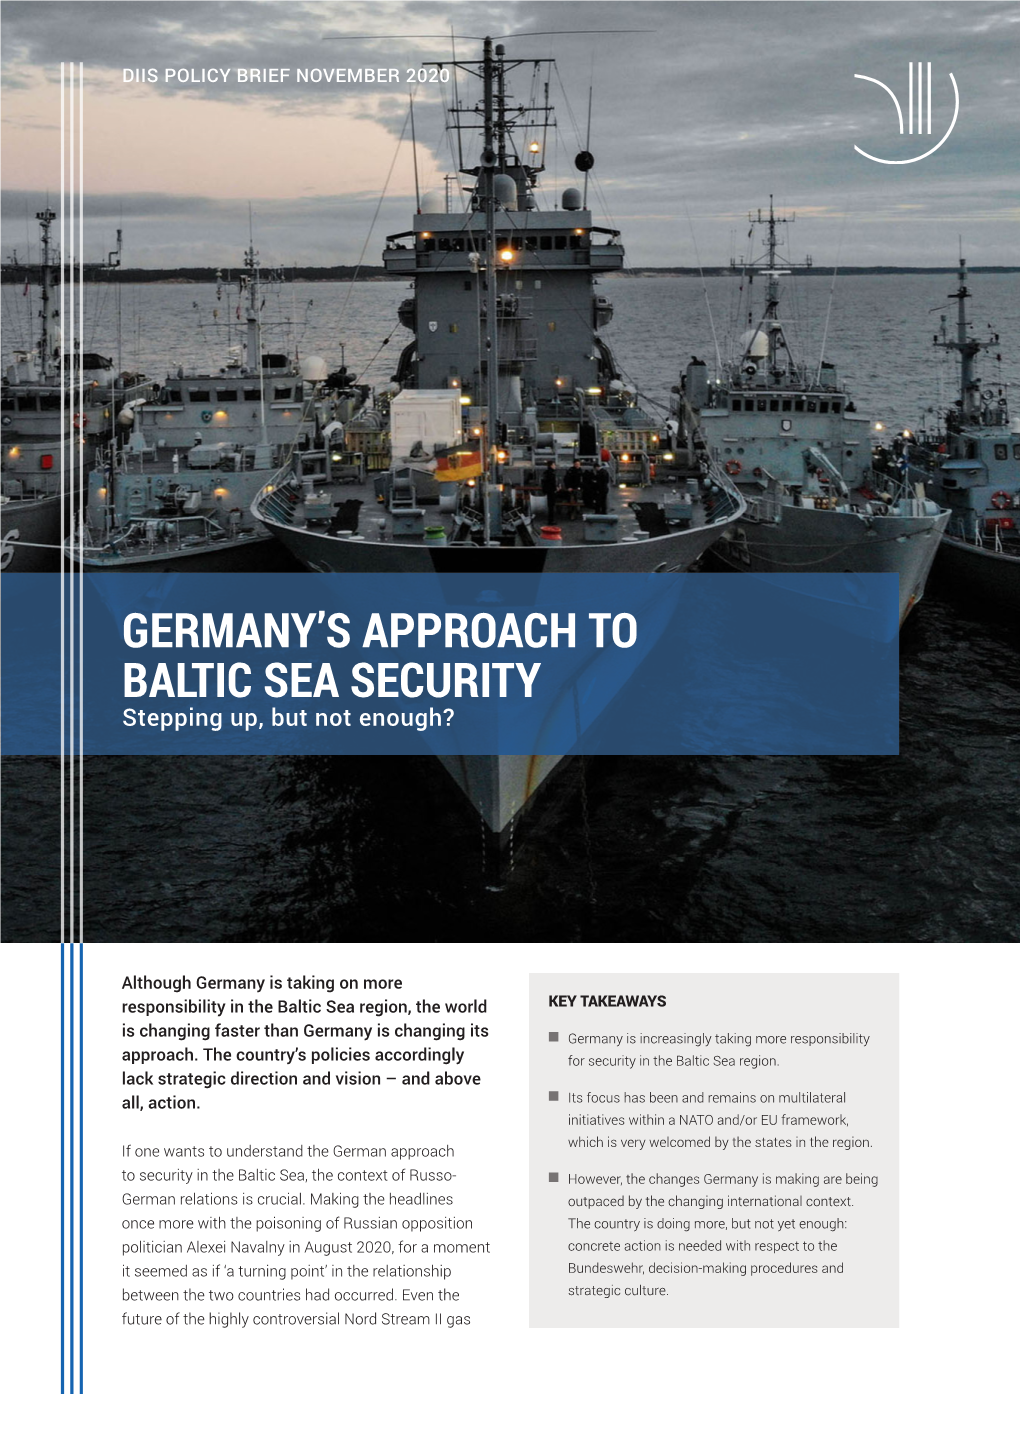 Germany's Approach to Baltic Sea Security